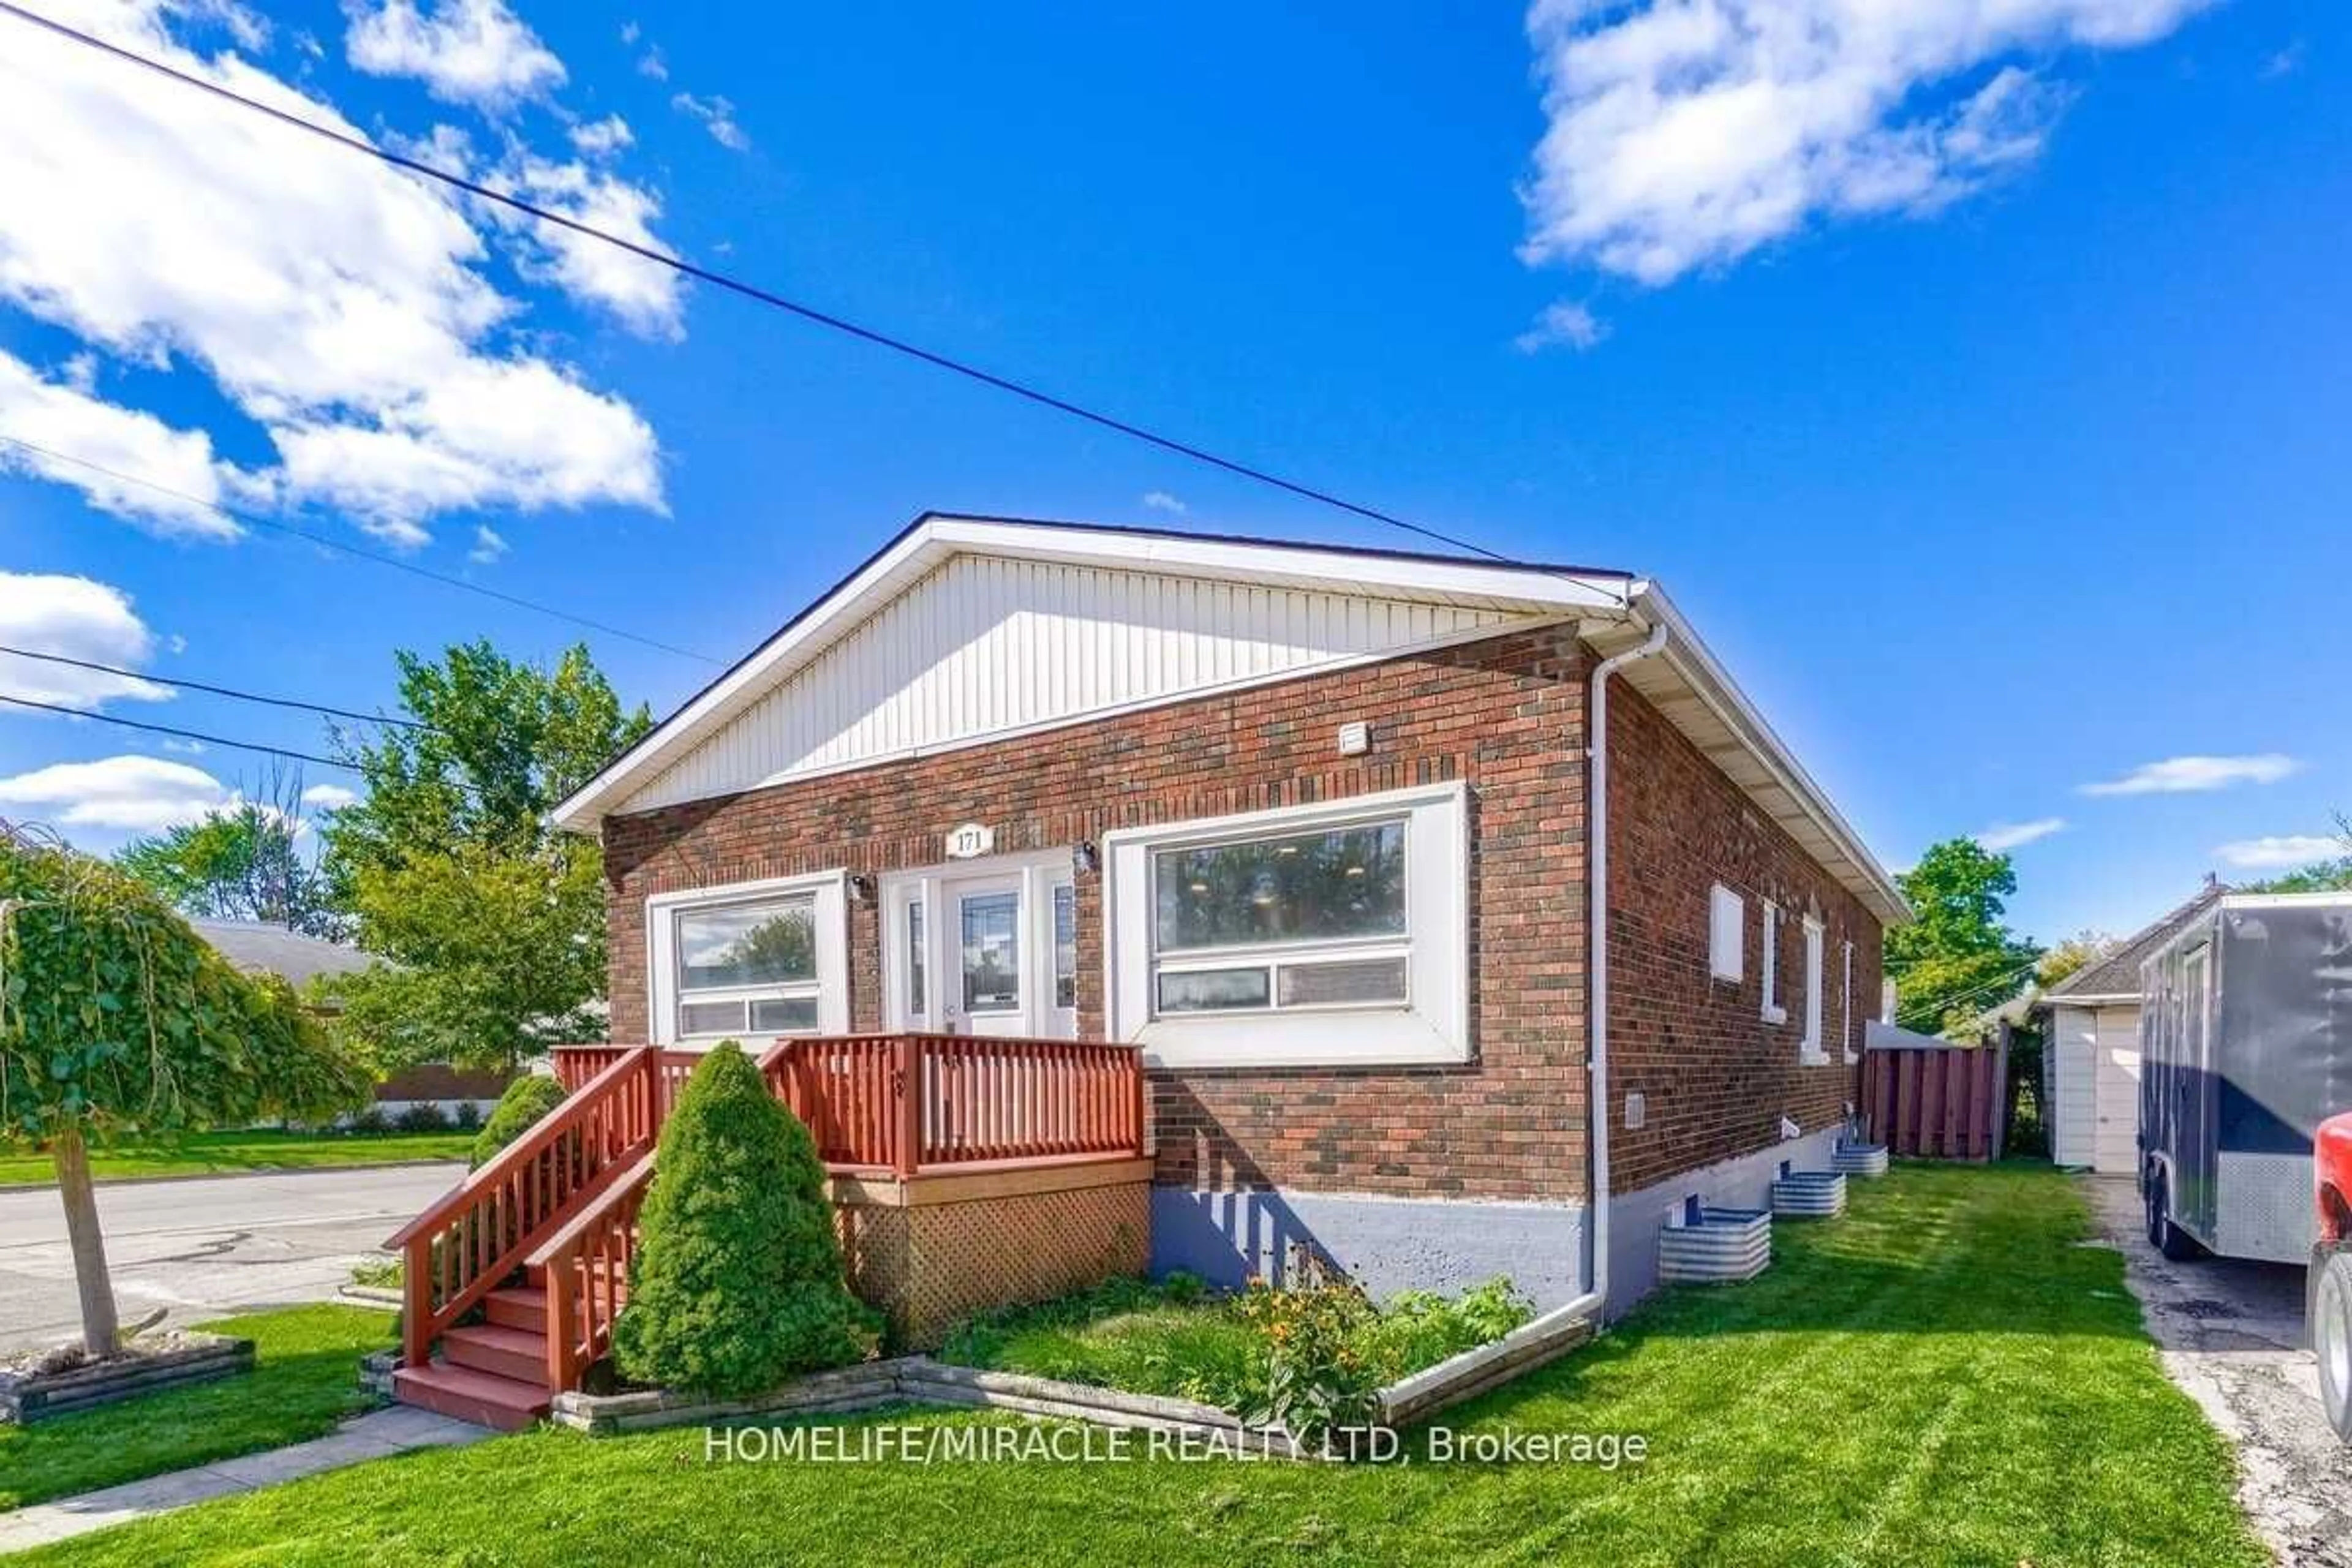 Frontside or backside of a home for 171 Wallace Ave, Welland Ontario L3B 1R4